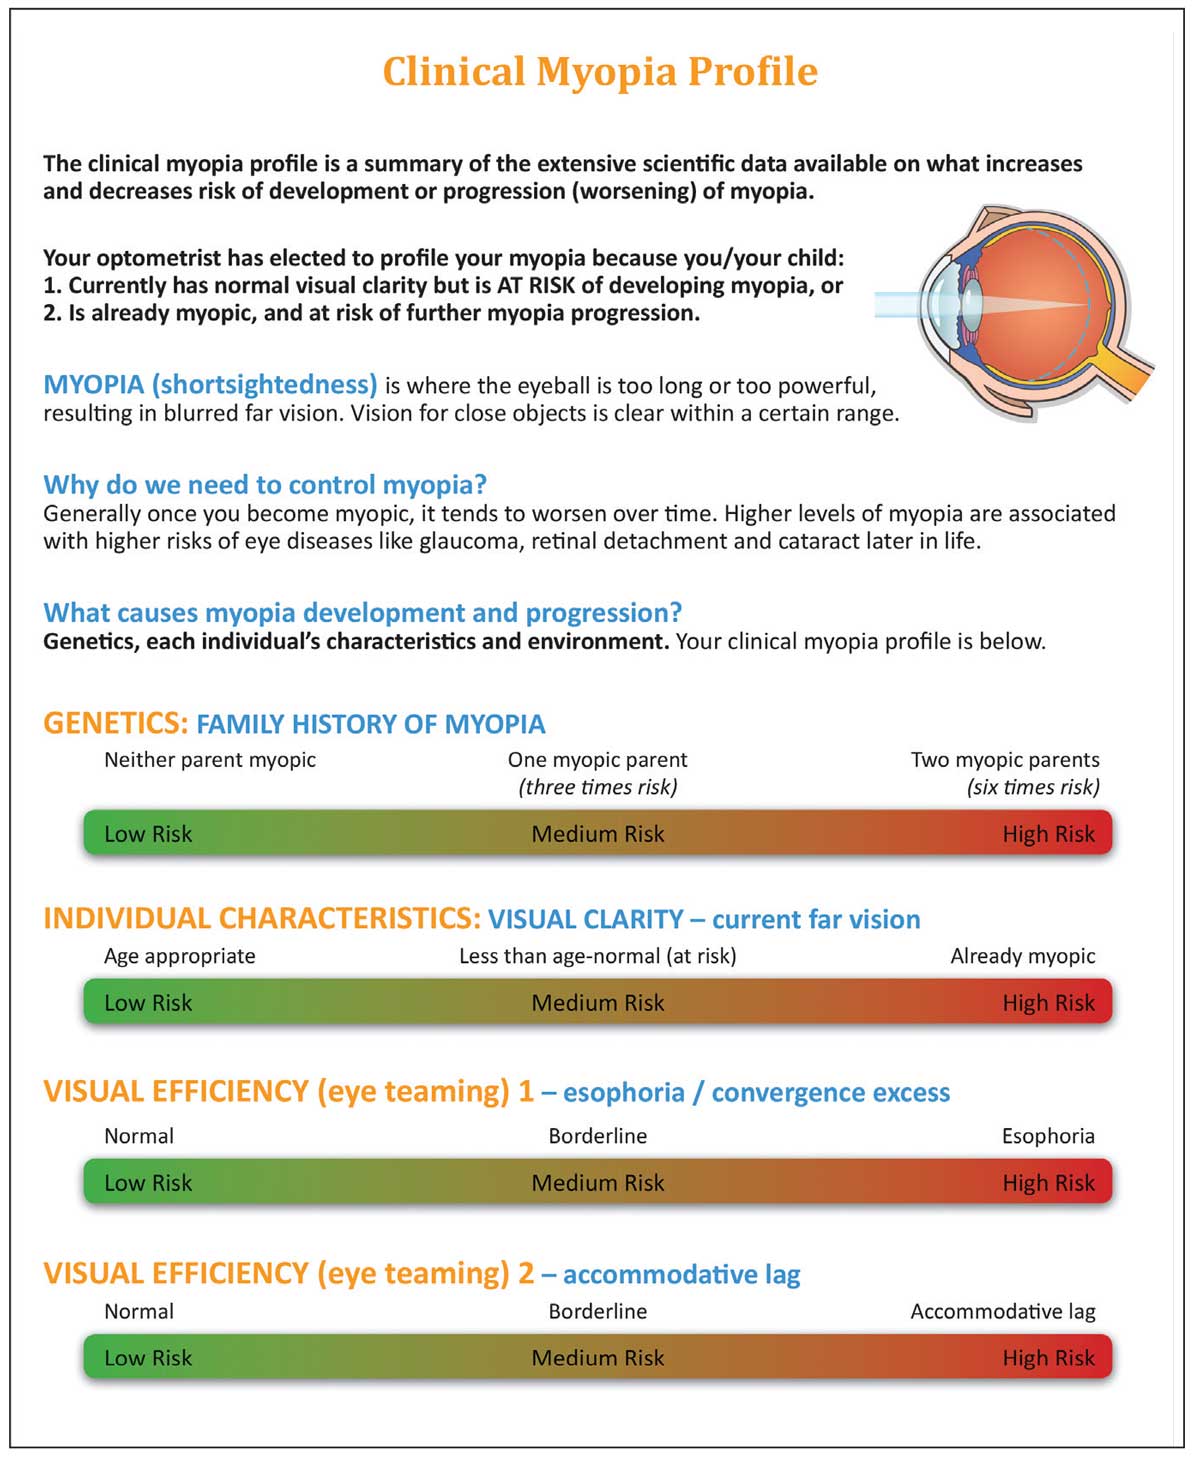 The Myopia Profile tool, designed by Kate Gifford, PhD, helps practitioners explain to the child and their parents the outcomes of the exam more effectively. It is available at www.myopiaprofile.com, along with other resources from Dr. Gifford.